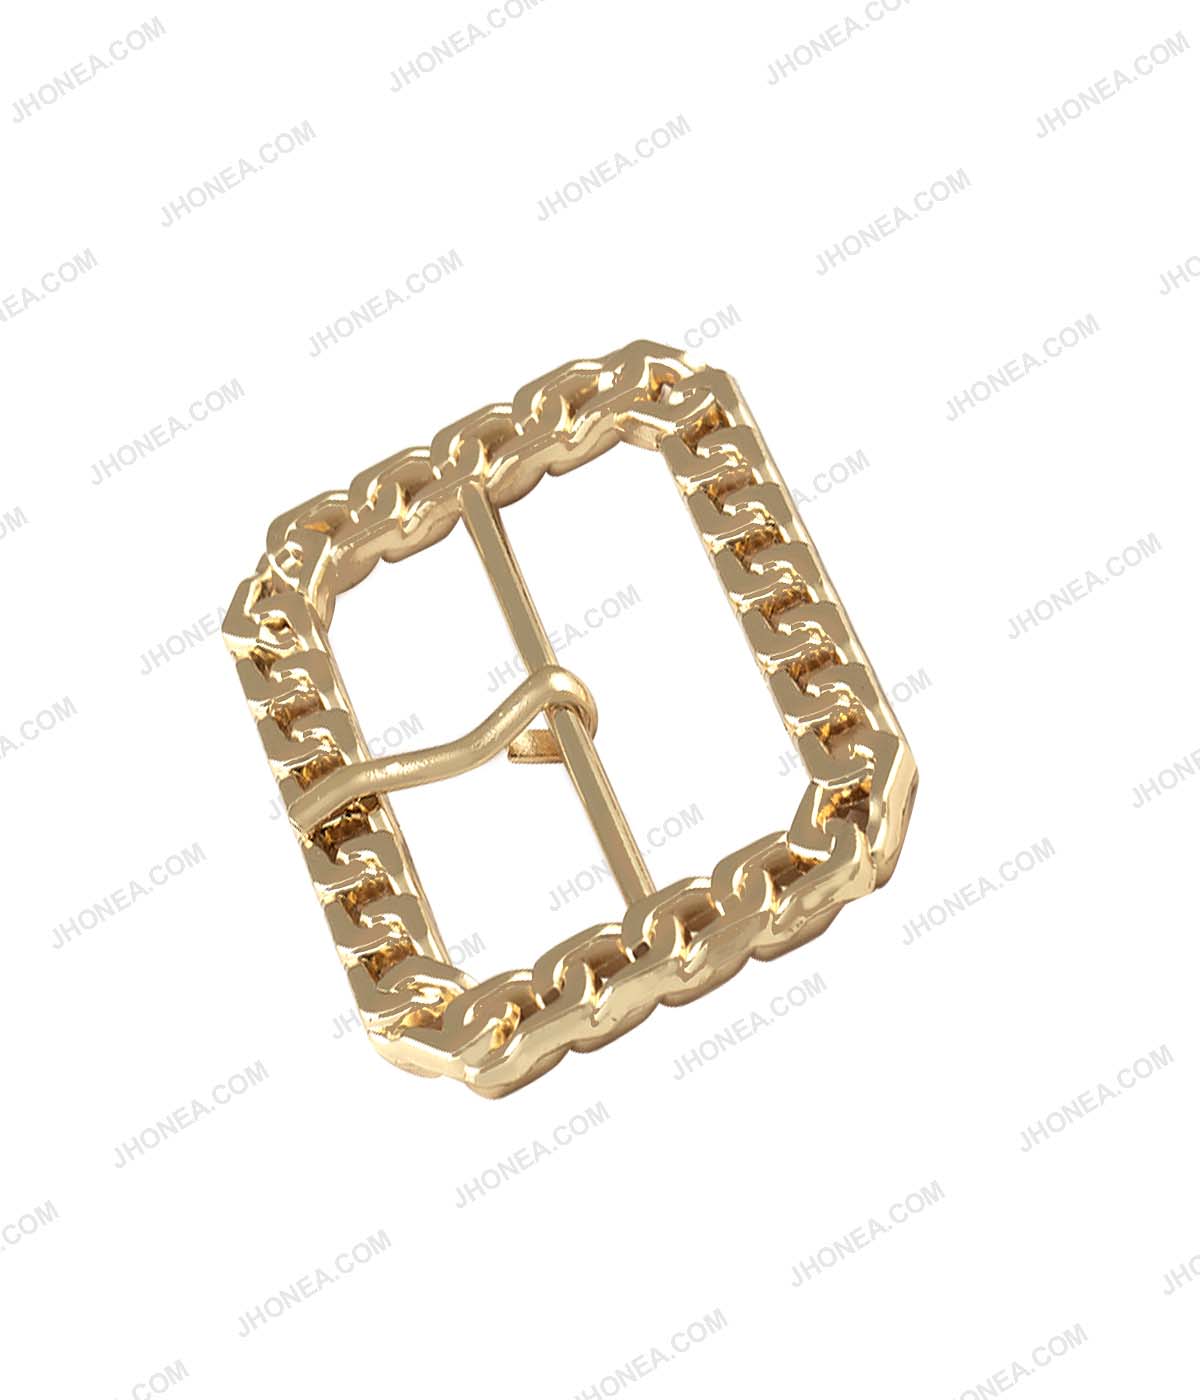 Rounded Rectangle Frame Shiny Gold Chain Design Prong Belt Buckle